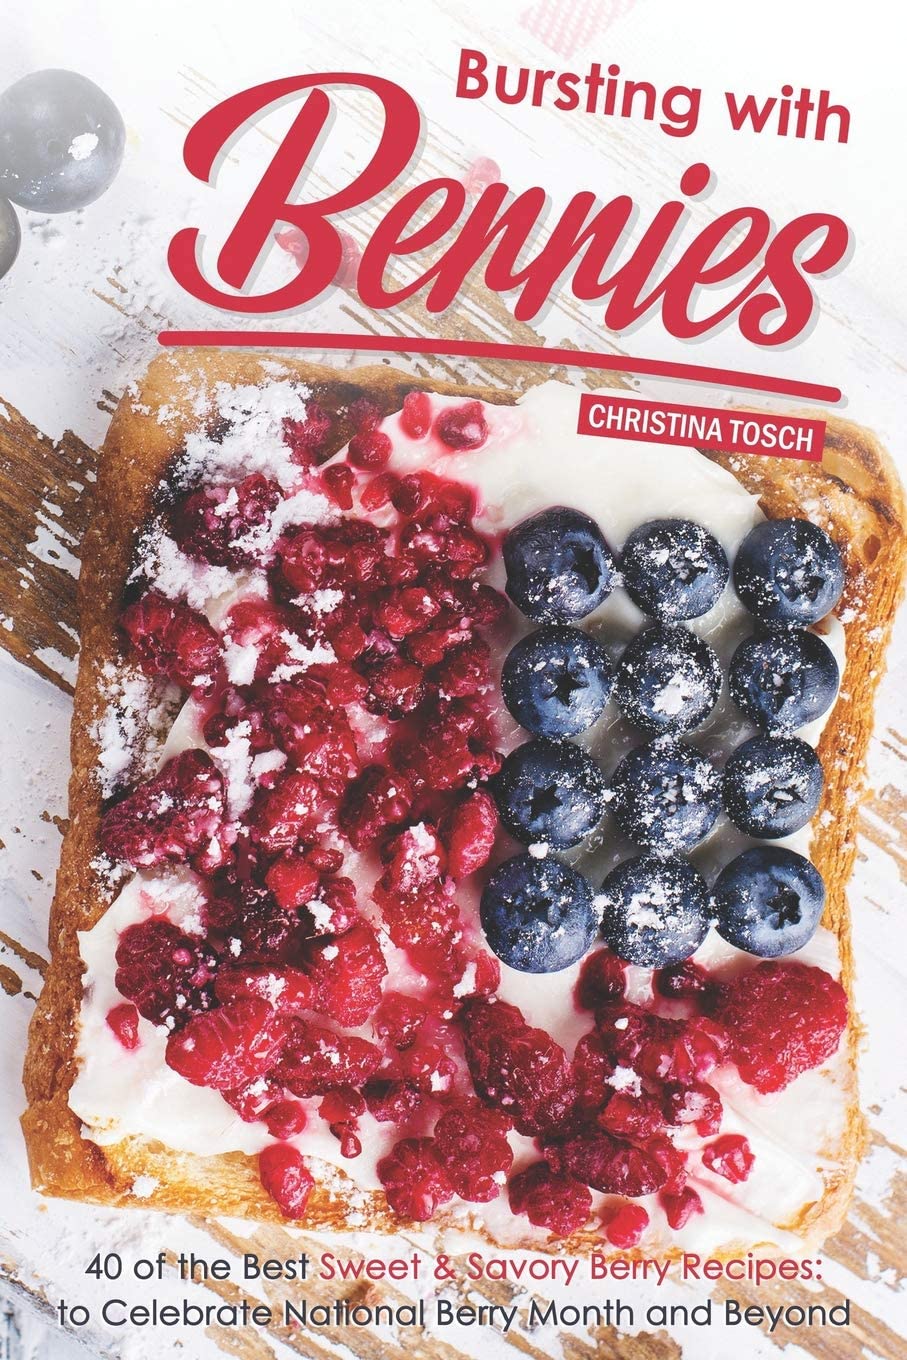 Bursting with Berries!: 40 of the Best Sweet & Savory Berry Recipes: to Celebrate National Berry Month and Beyond